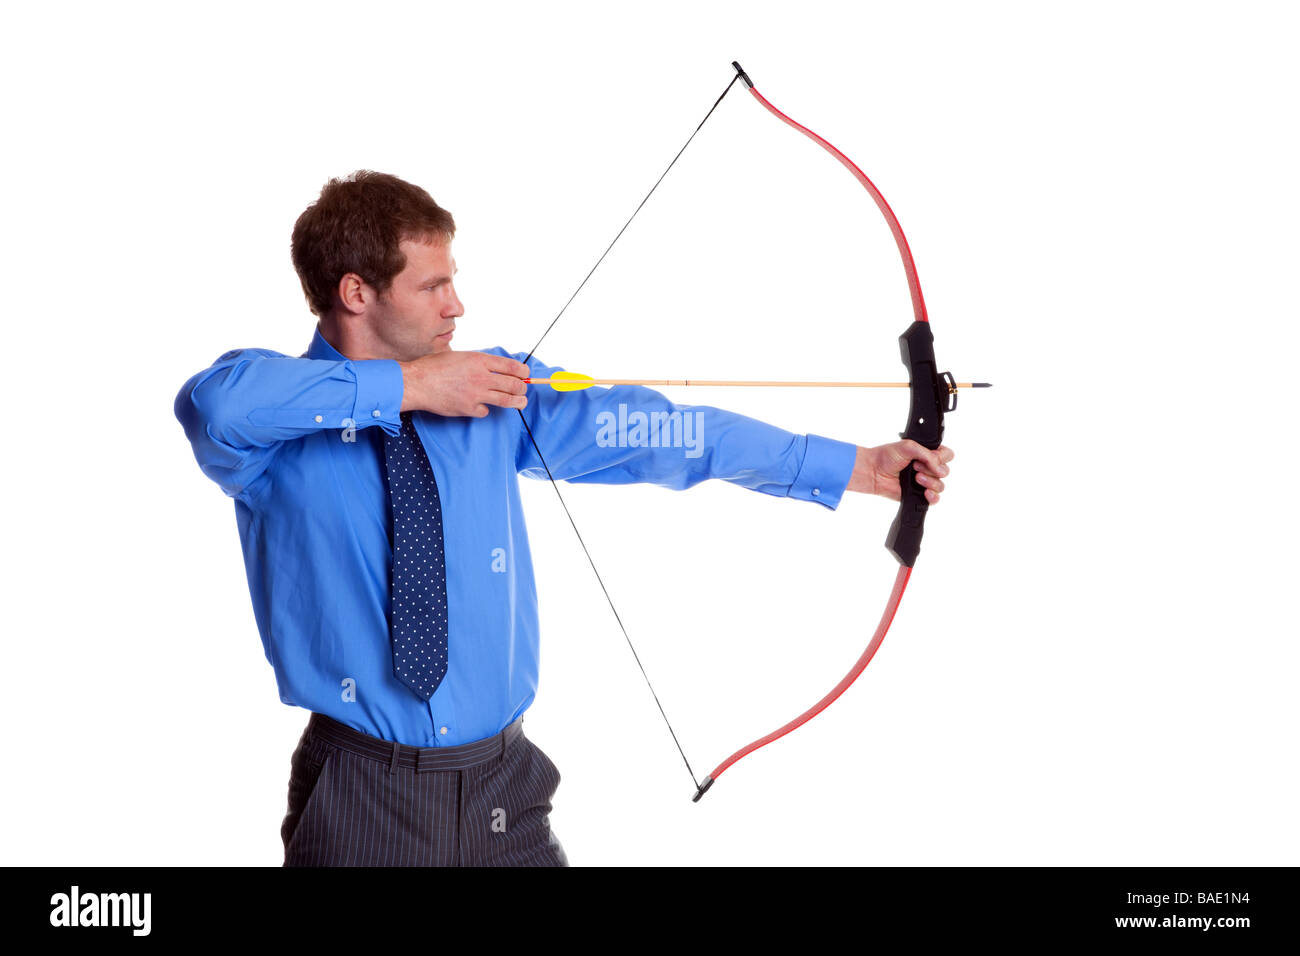 Businessman with a bow and arrow side view isolated on white background Stock Photo